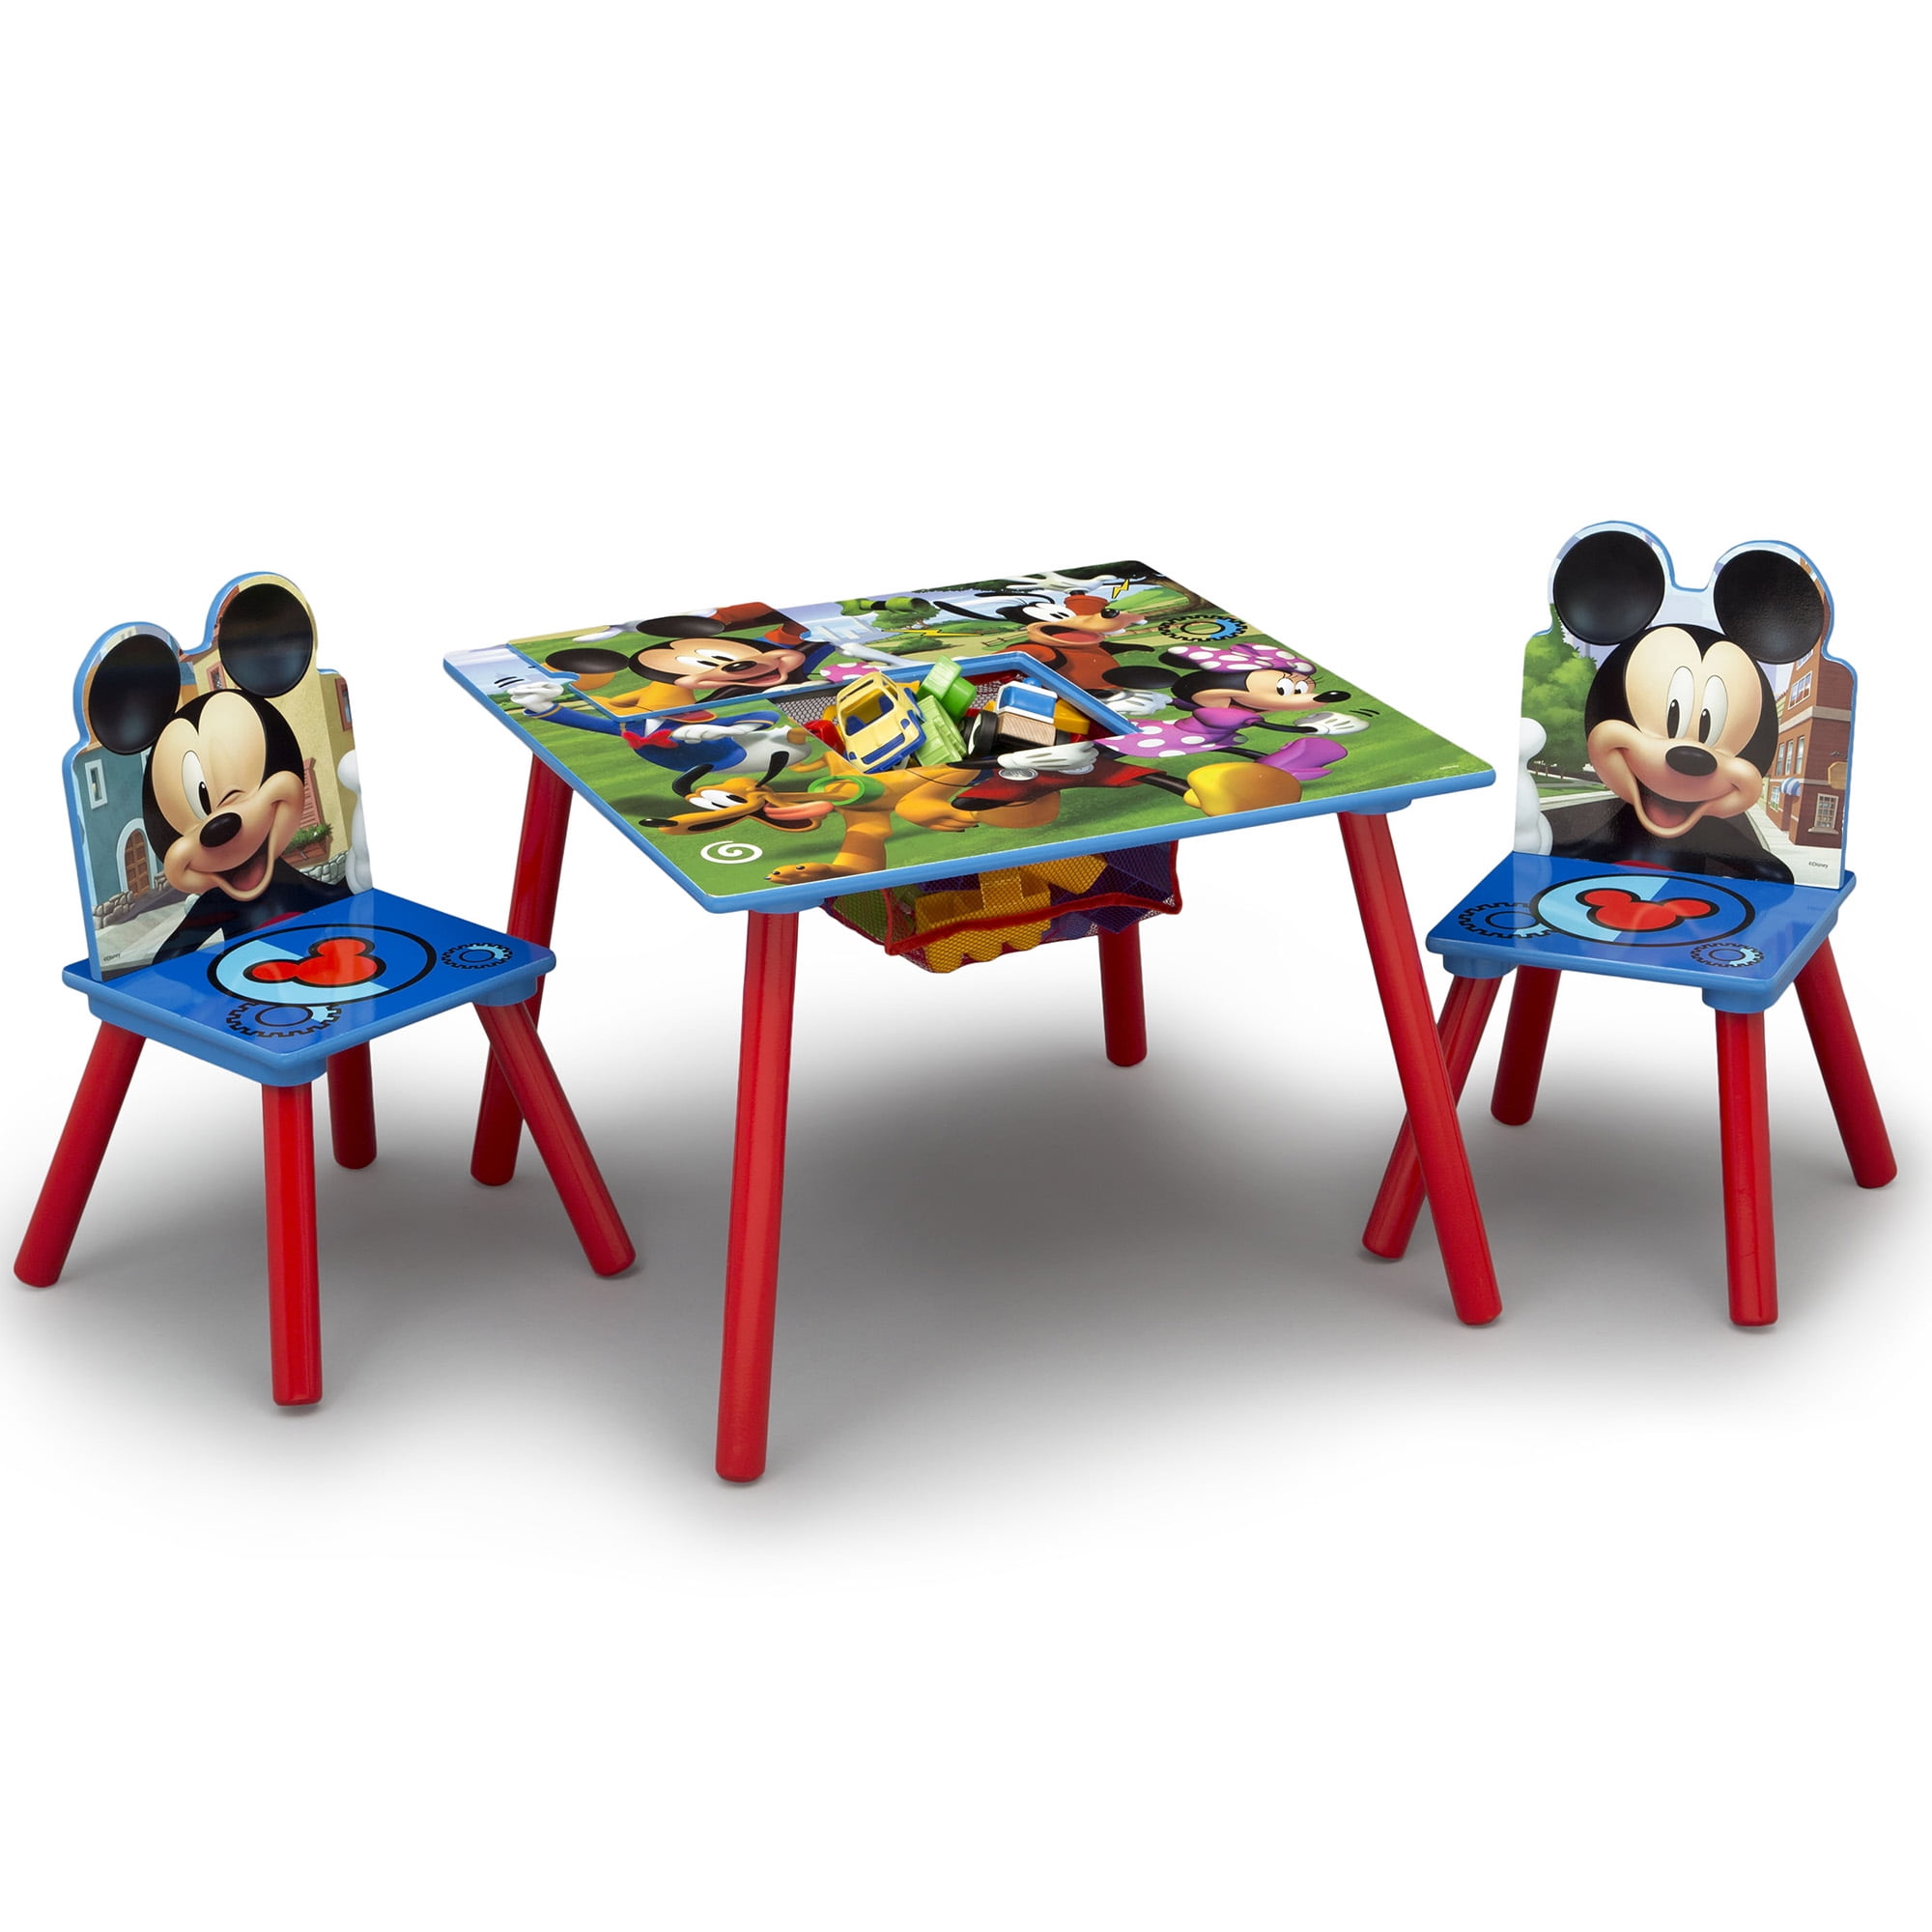 Chair Desk w/ Storage Bin for 3-6 years Mickey Mouse Design 